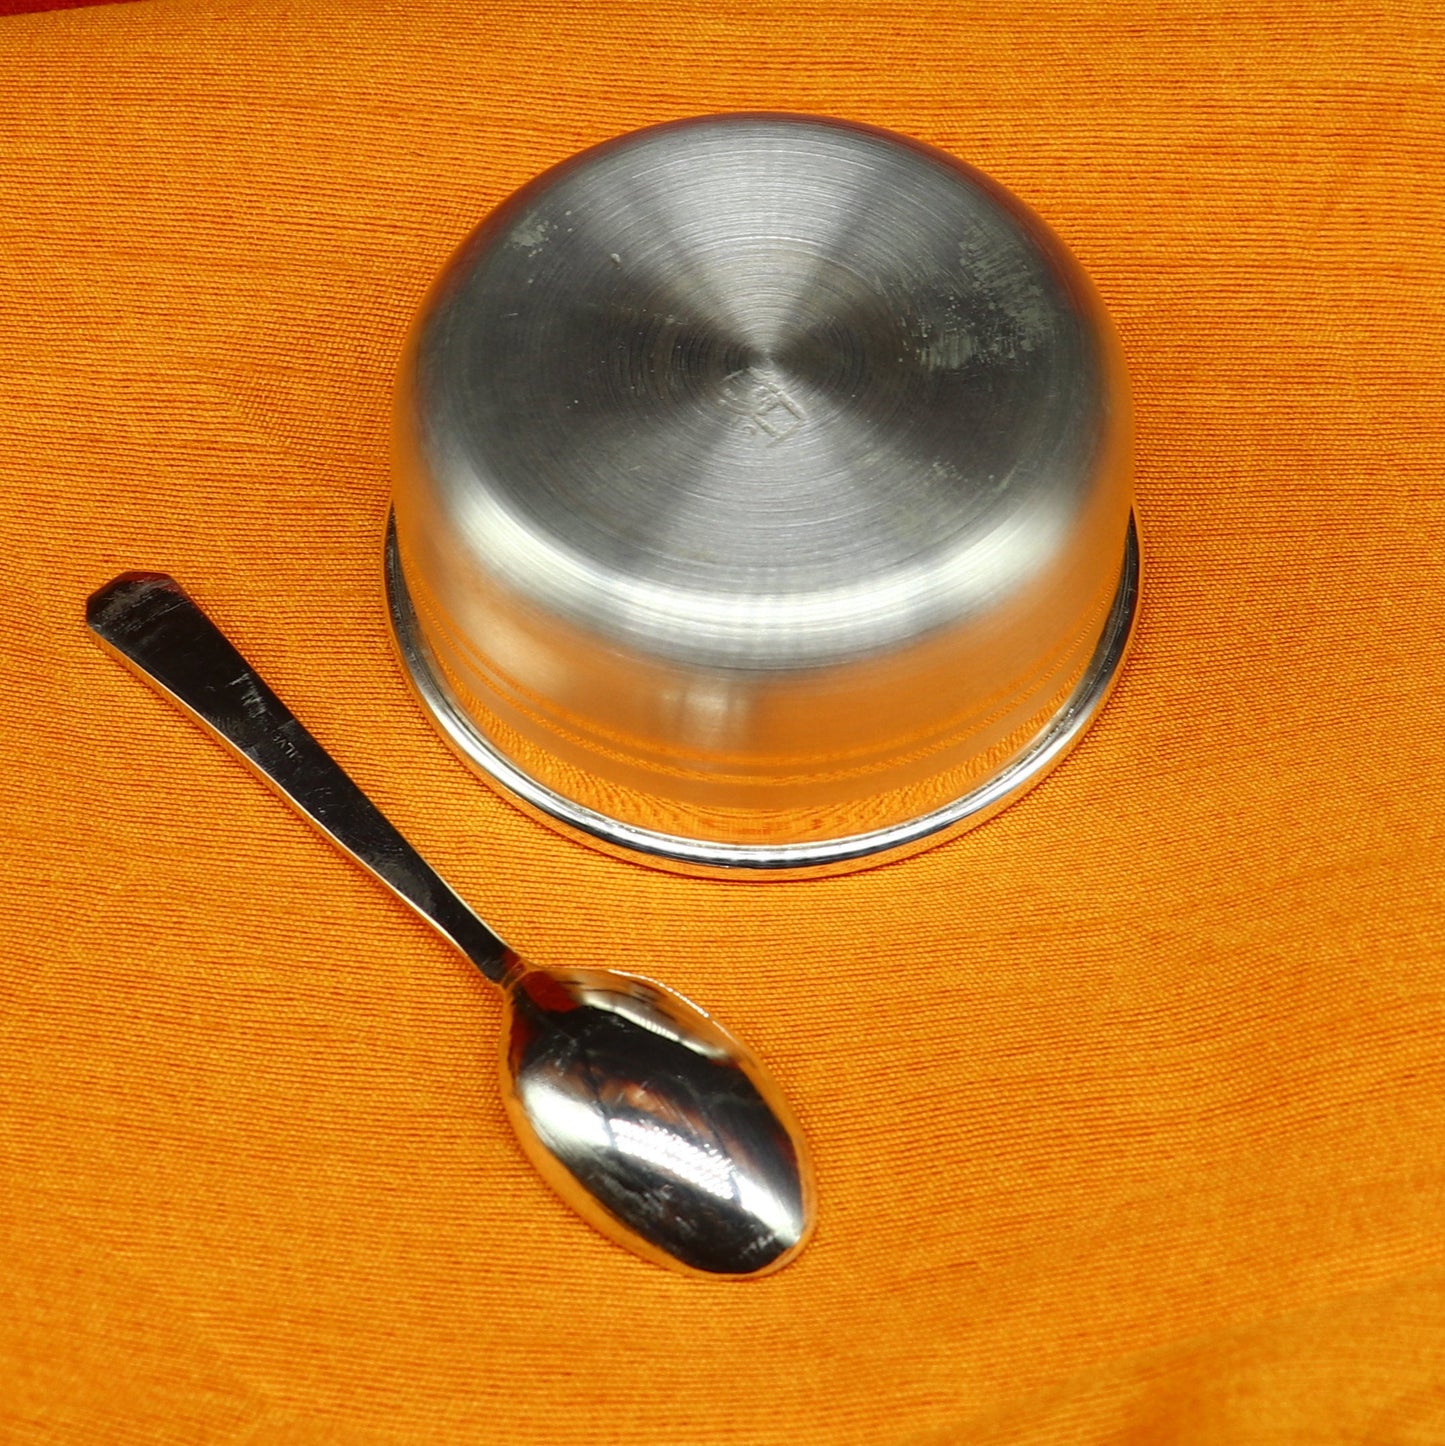 999 fine silver handmade small baby bowl and spoon set, silver tumbler, flask, stay baby/kids healthy, silver vessel utensils sv171 - TRIBAL ORNAMENTS